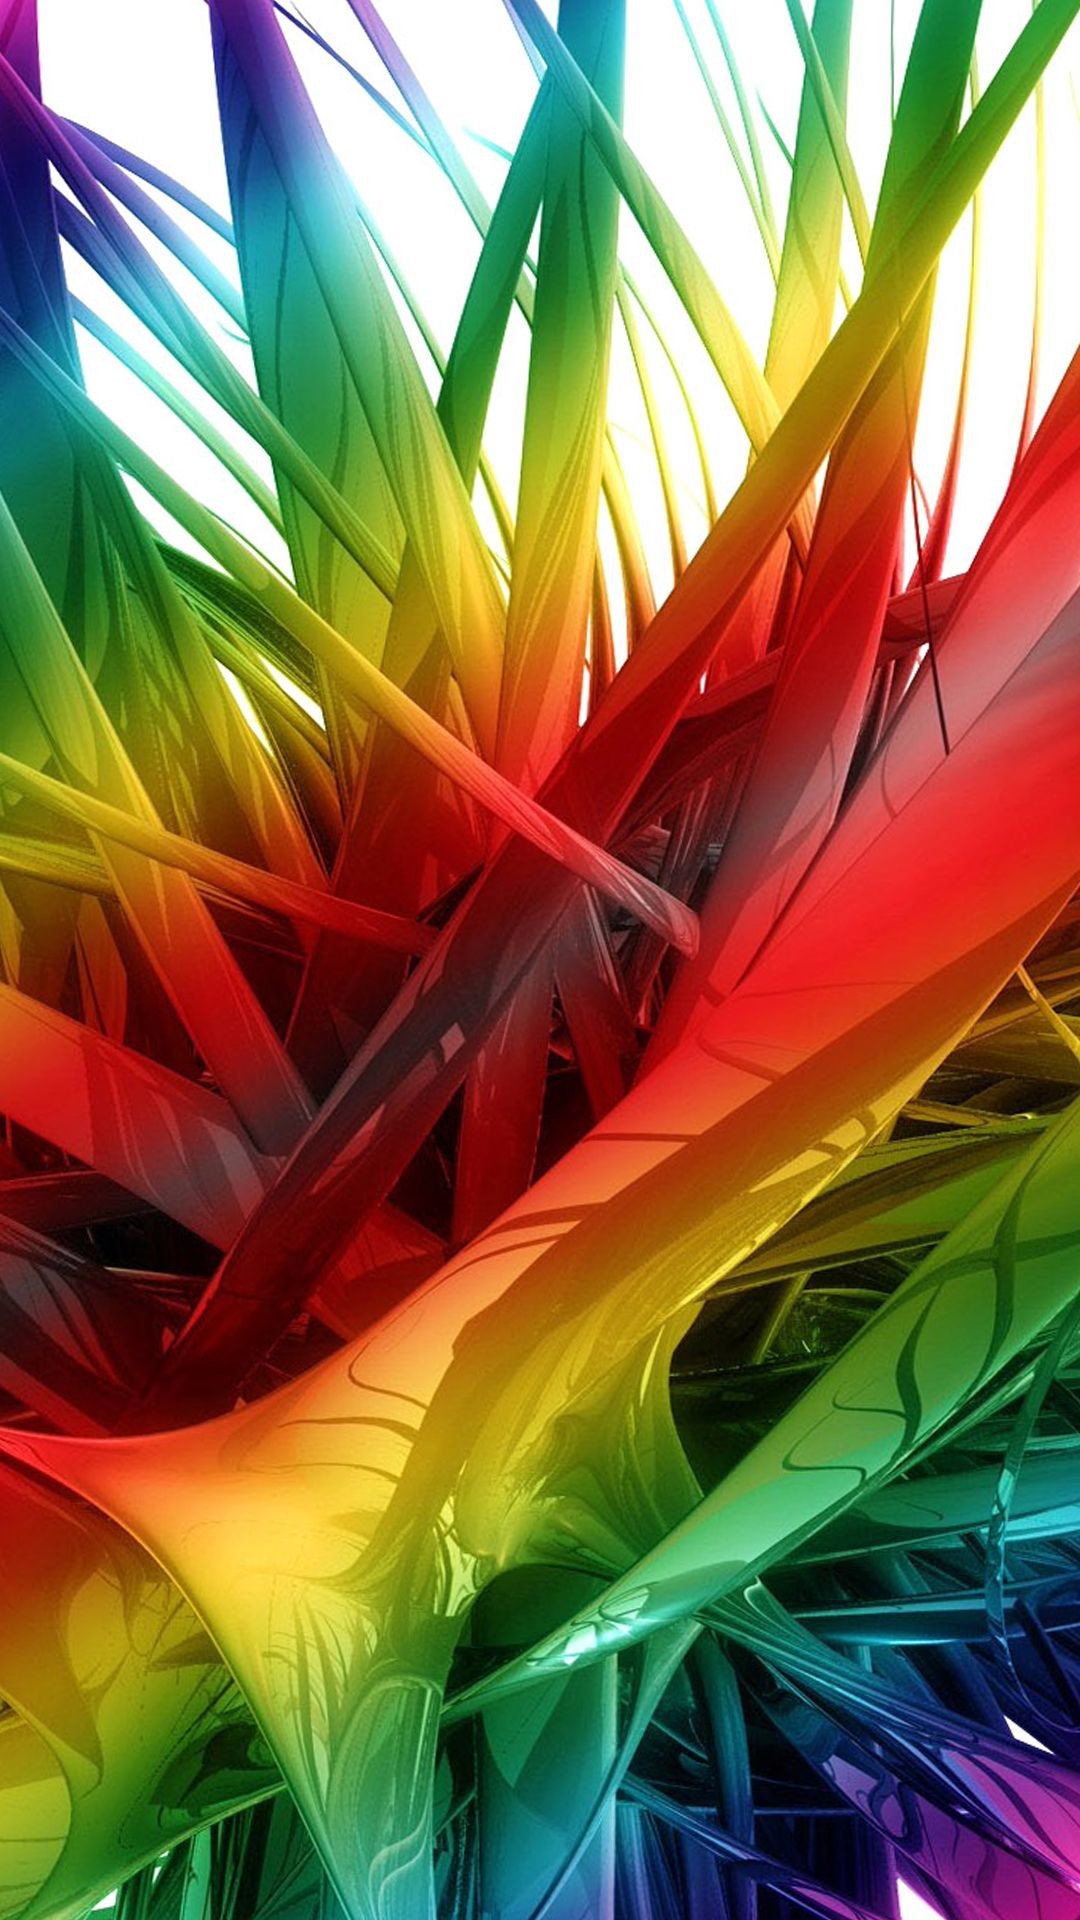 1080x1920 Abstract Colorful Wallpaper for Android Phones with 5 inch Display